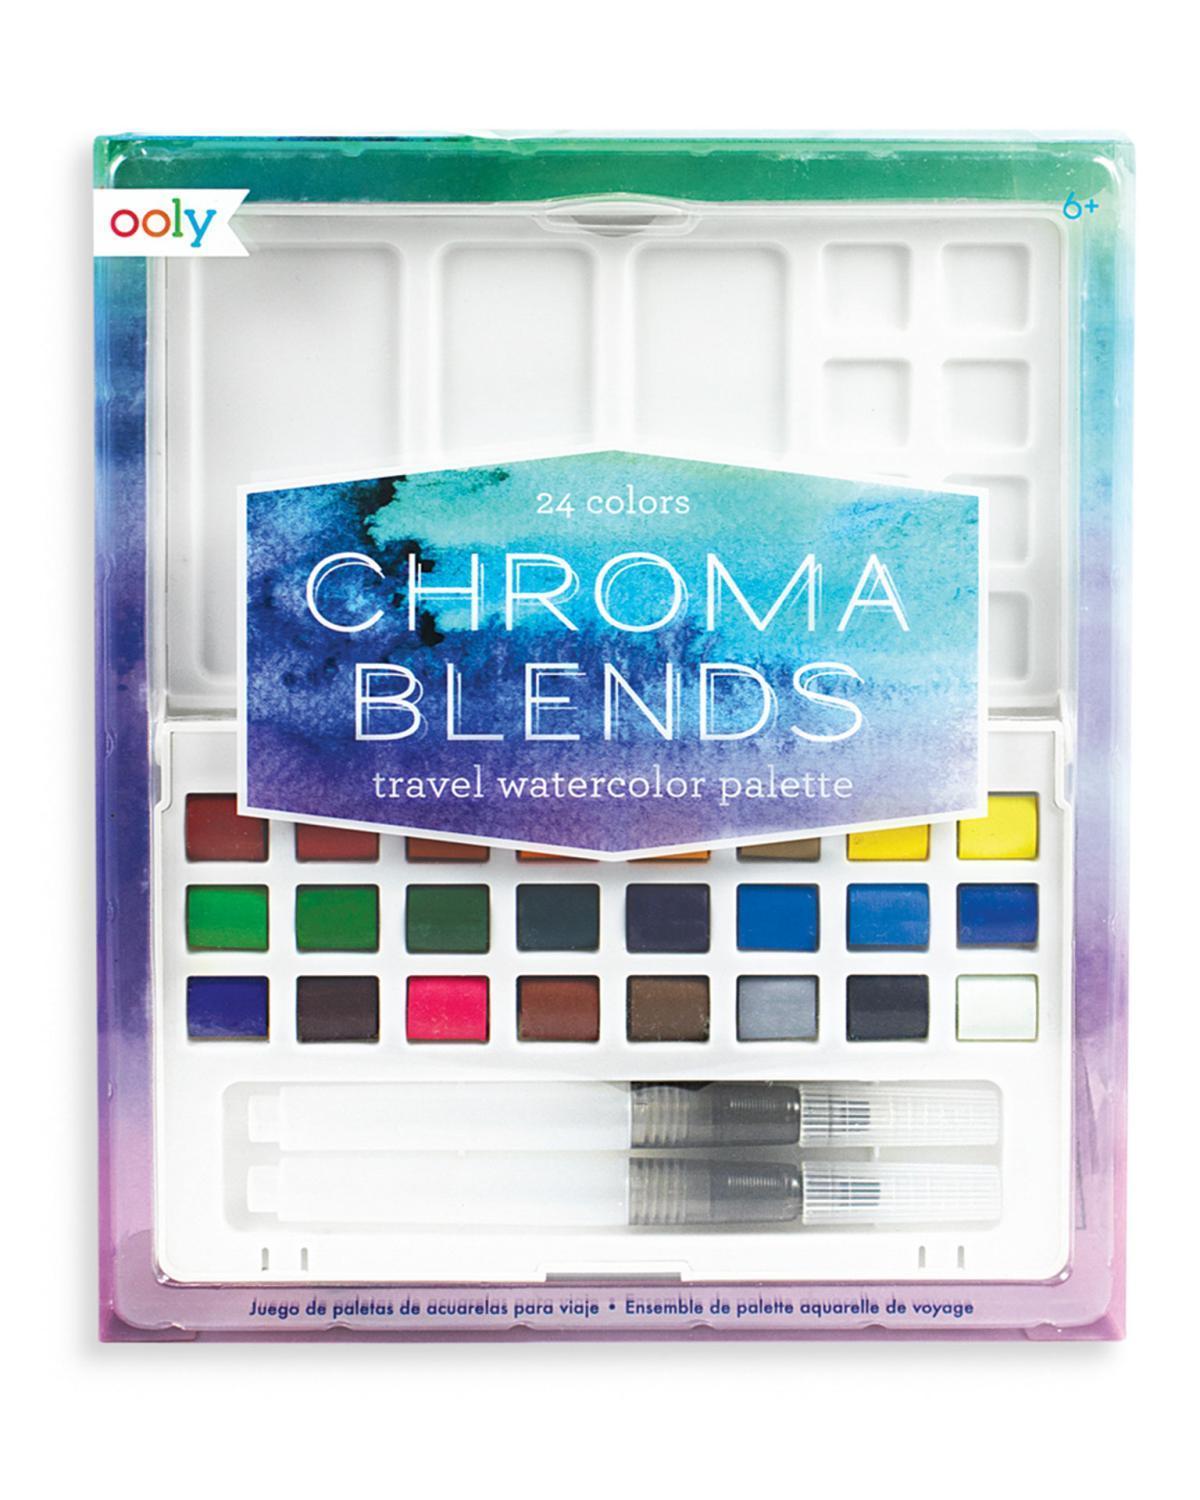 Little ooly play chroma travel watercolor set